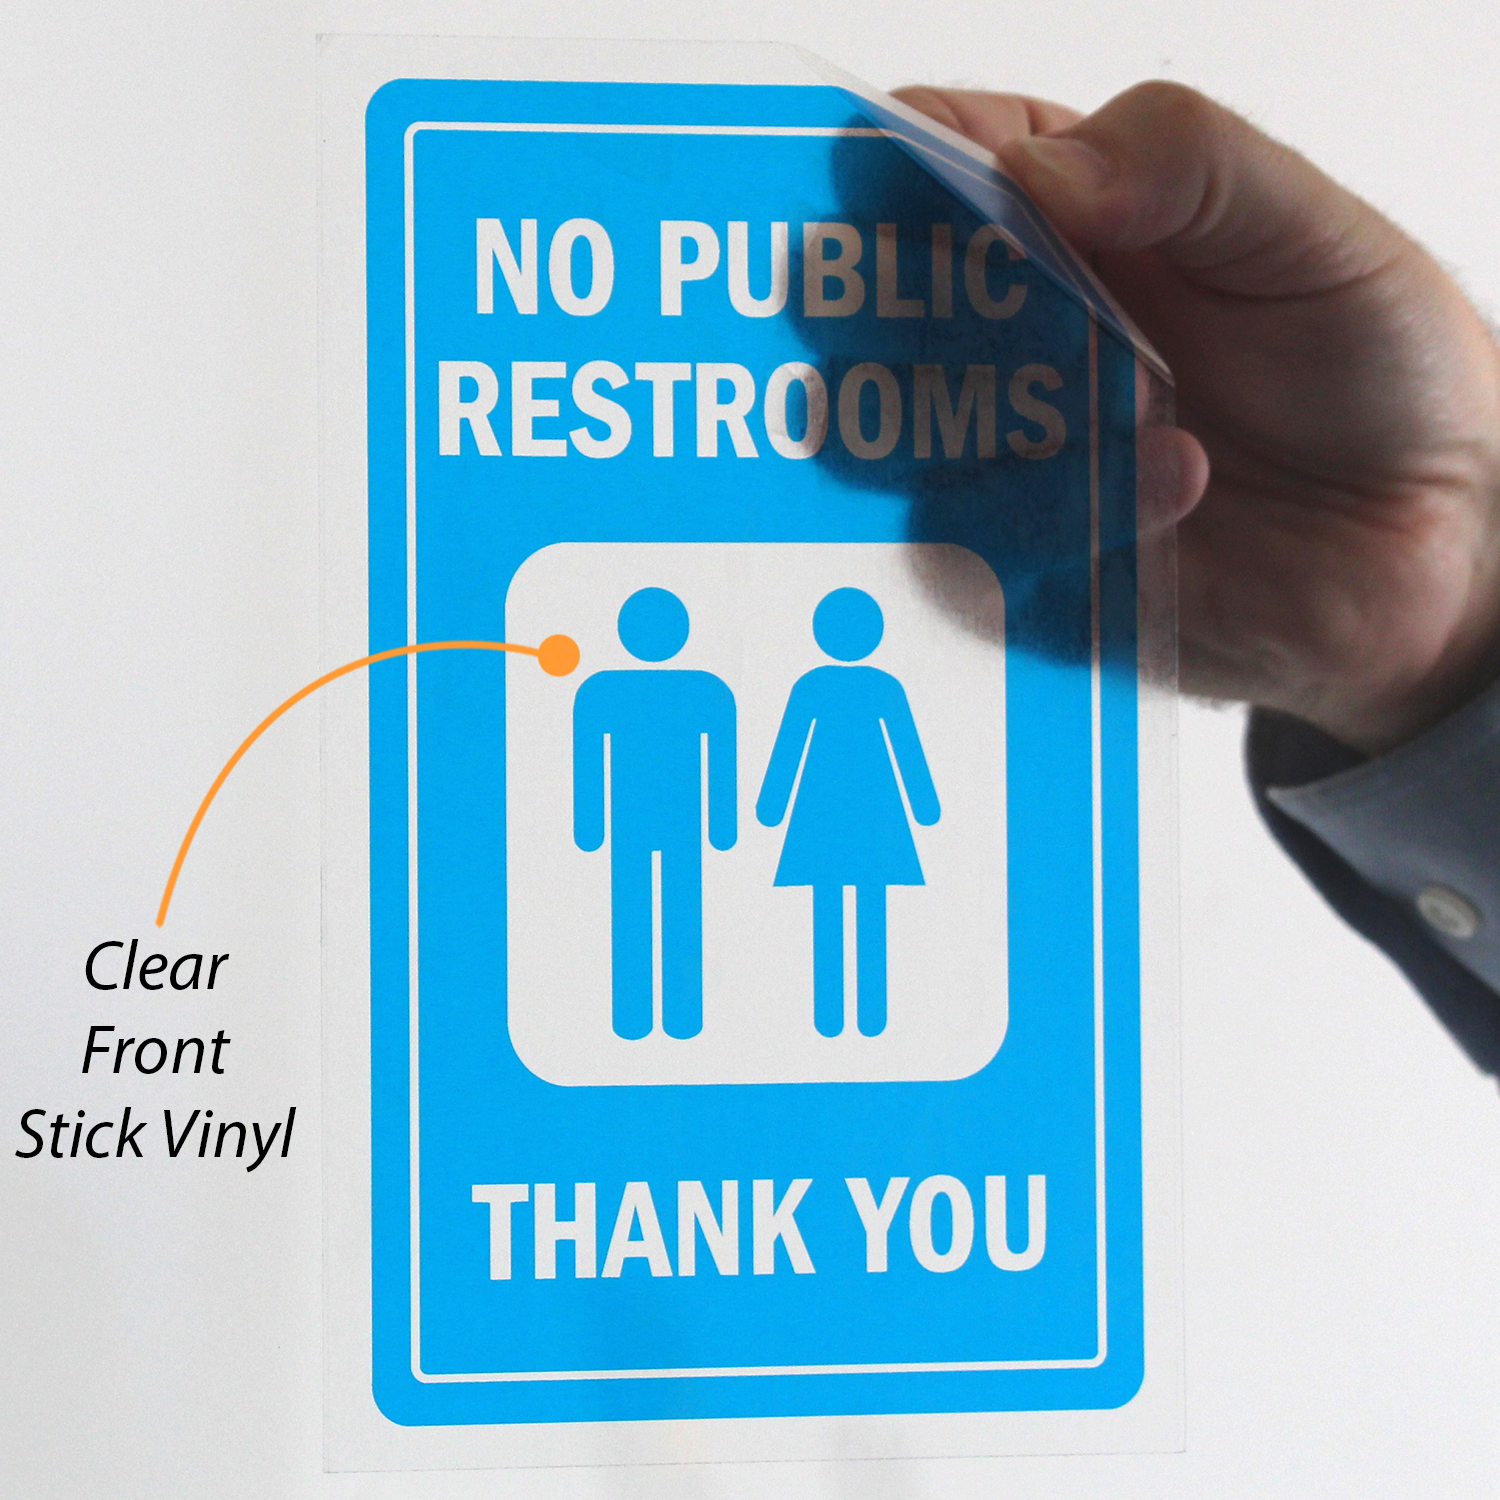 No Public Restrooms Window Decal With Graphic Free PDF Signs, SKU S4874